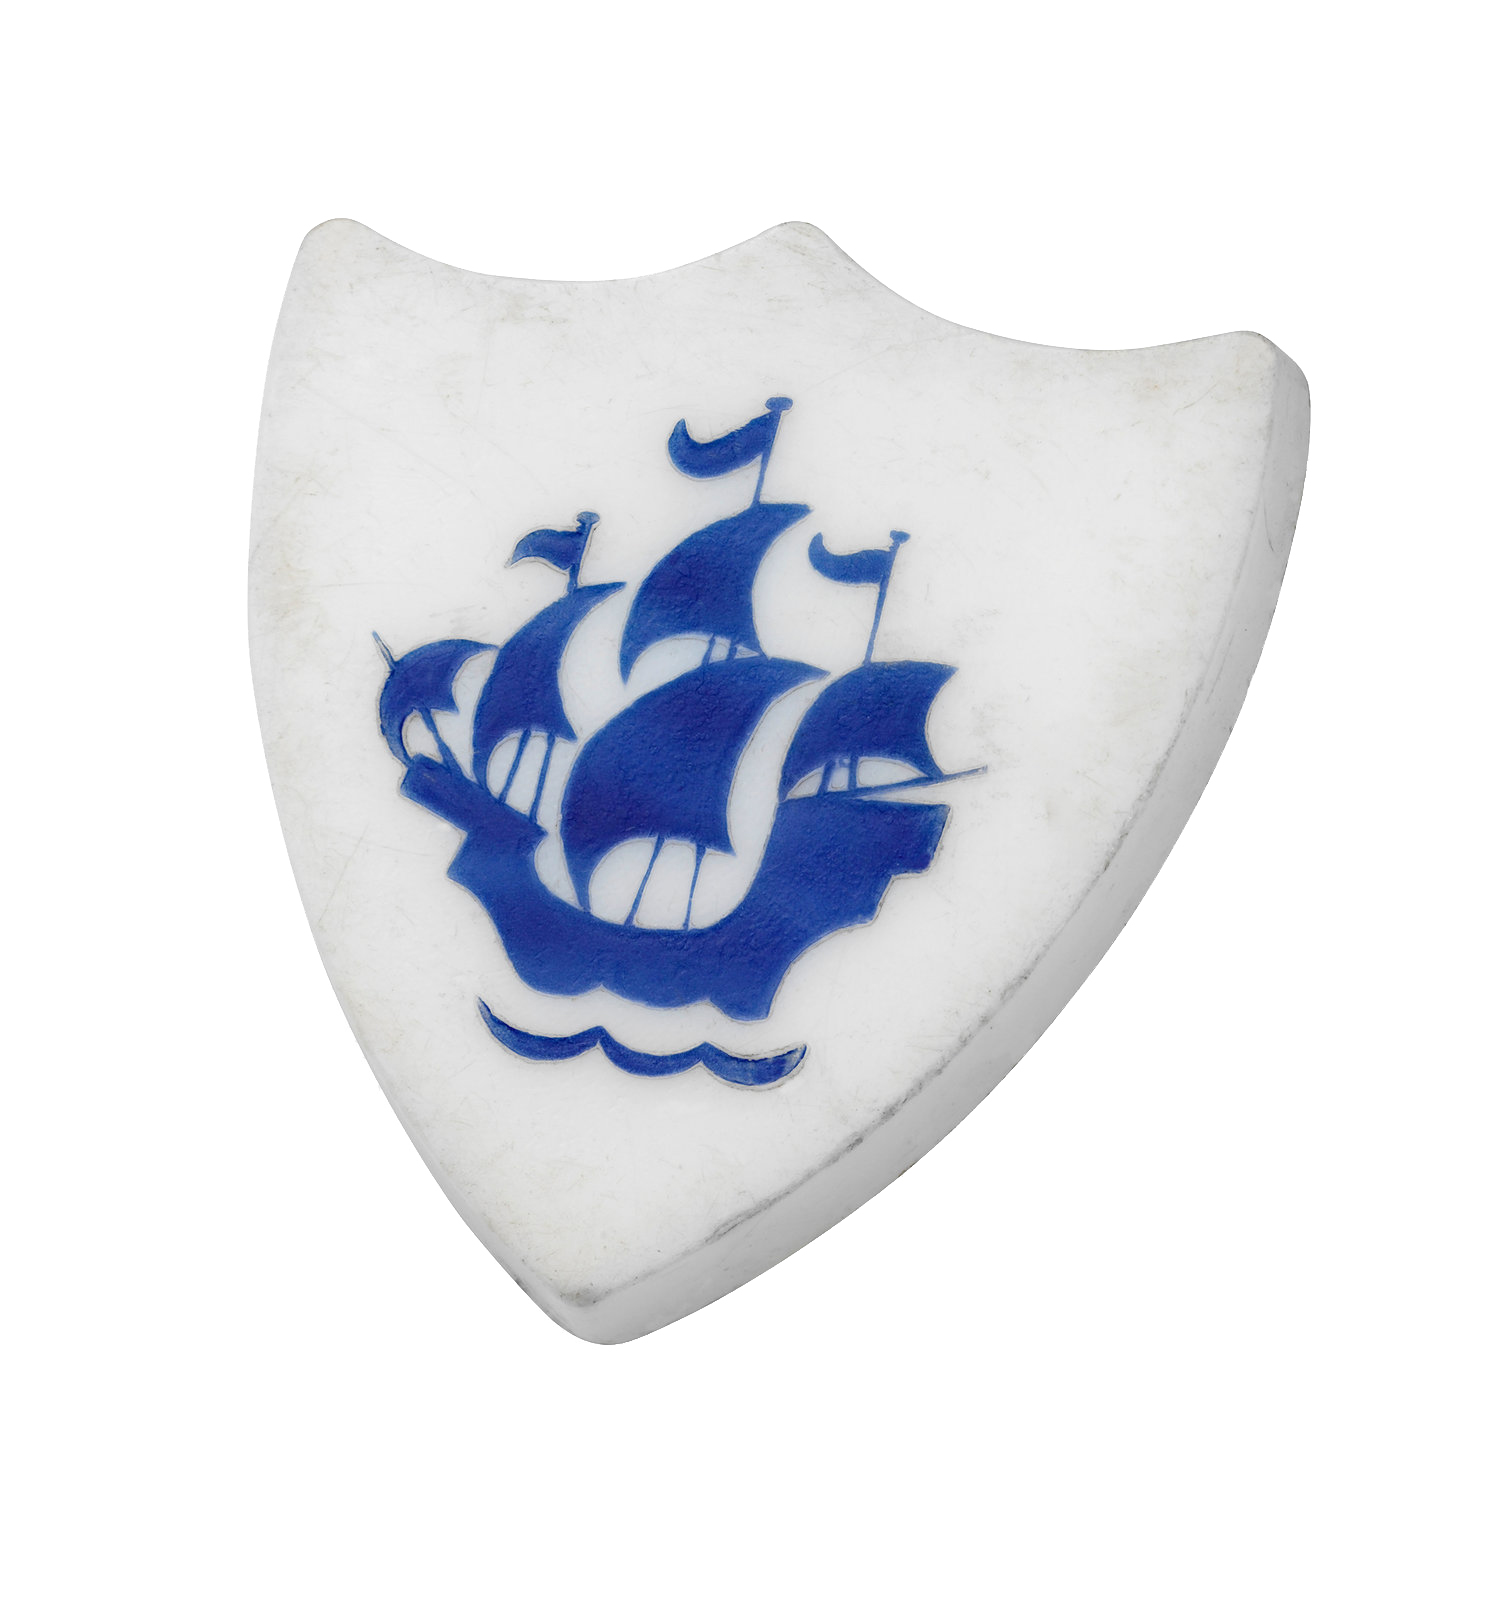 BECK0C An original Blue Peter badge from the 1960s. Image shot 2009. Exact date unknown.